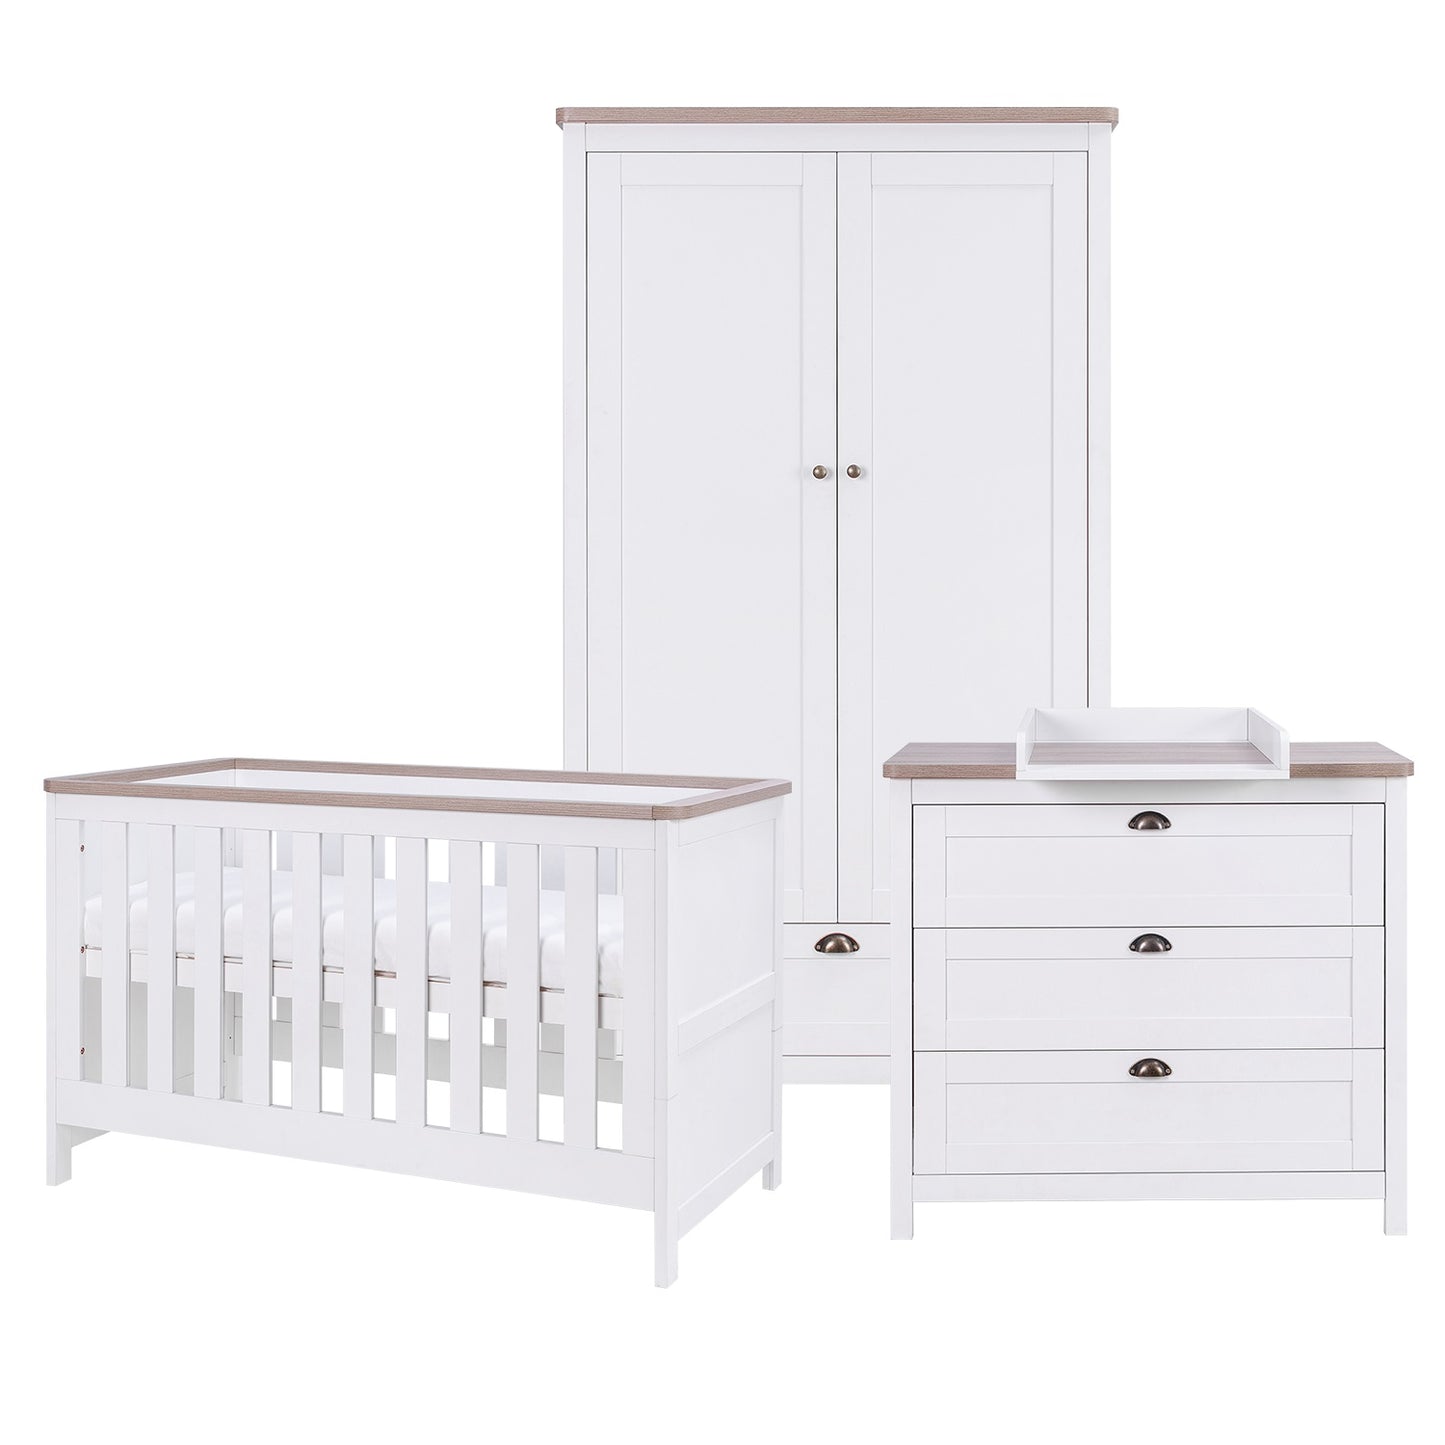 Tutti Bambini Verona 3 Piece Range with Cot Bed, Dresser Changer and Wardrobe